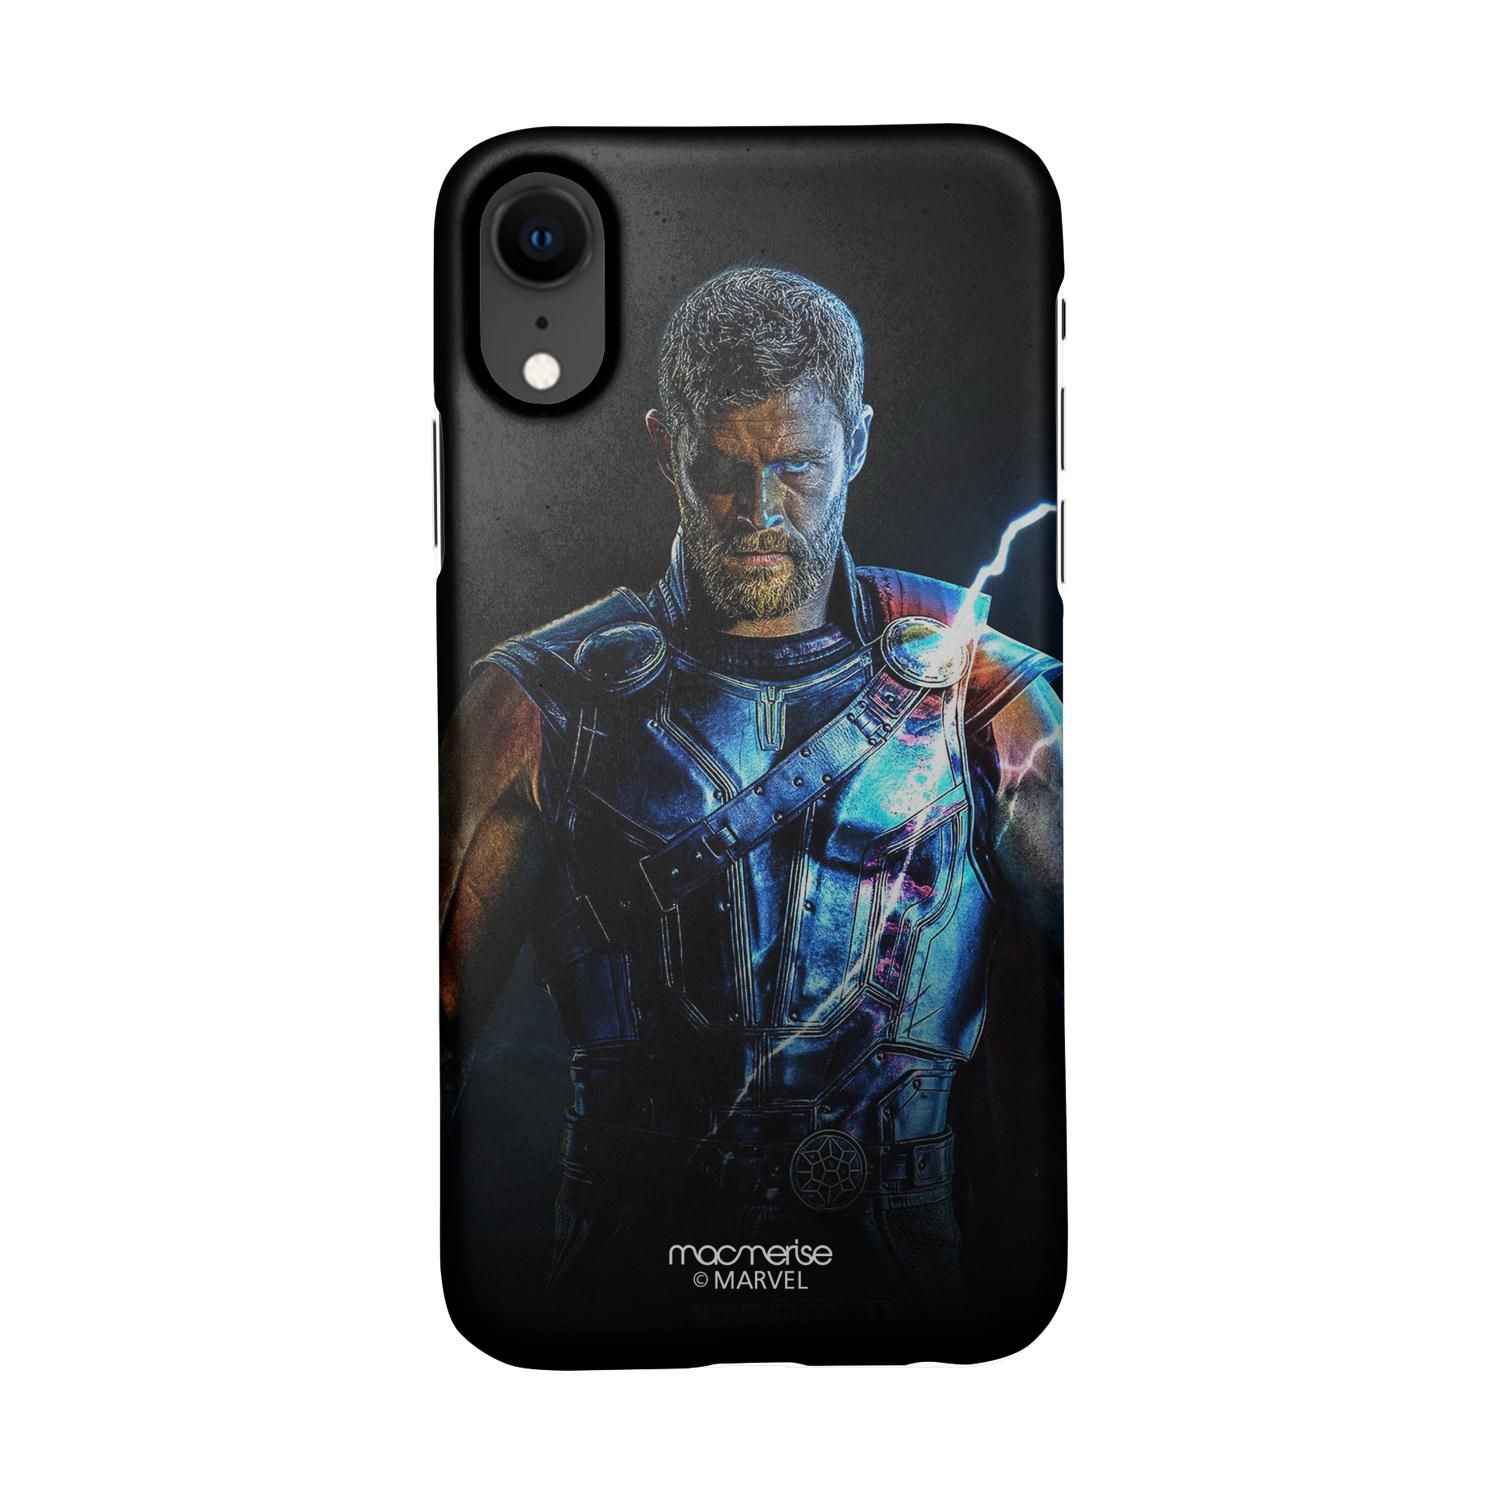 Buy The Thor Triumph - Sleek Phone Case for iPhone XR Online